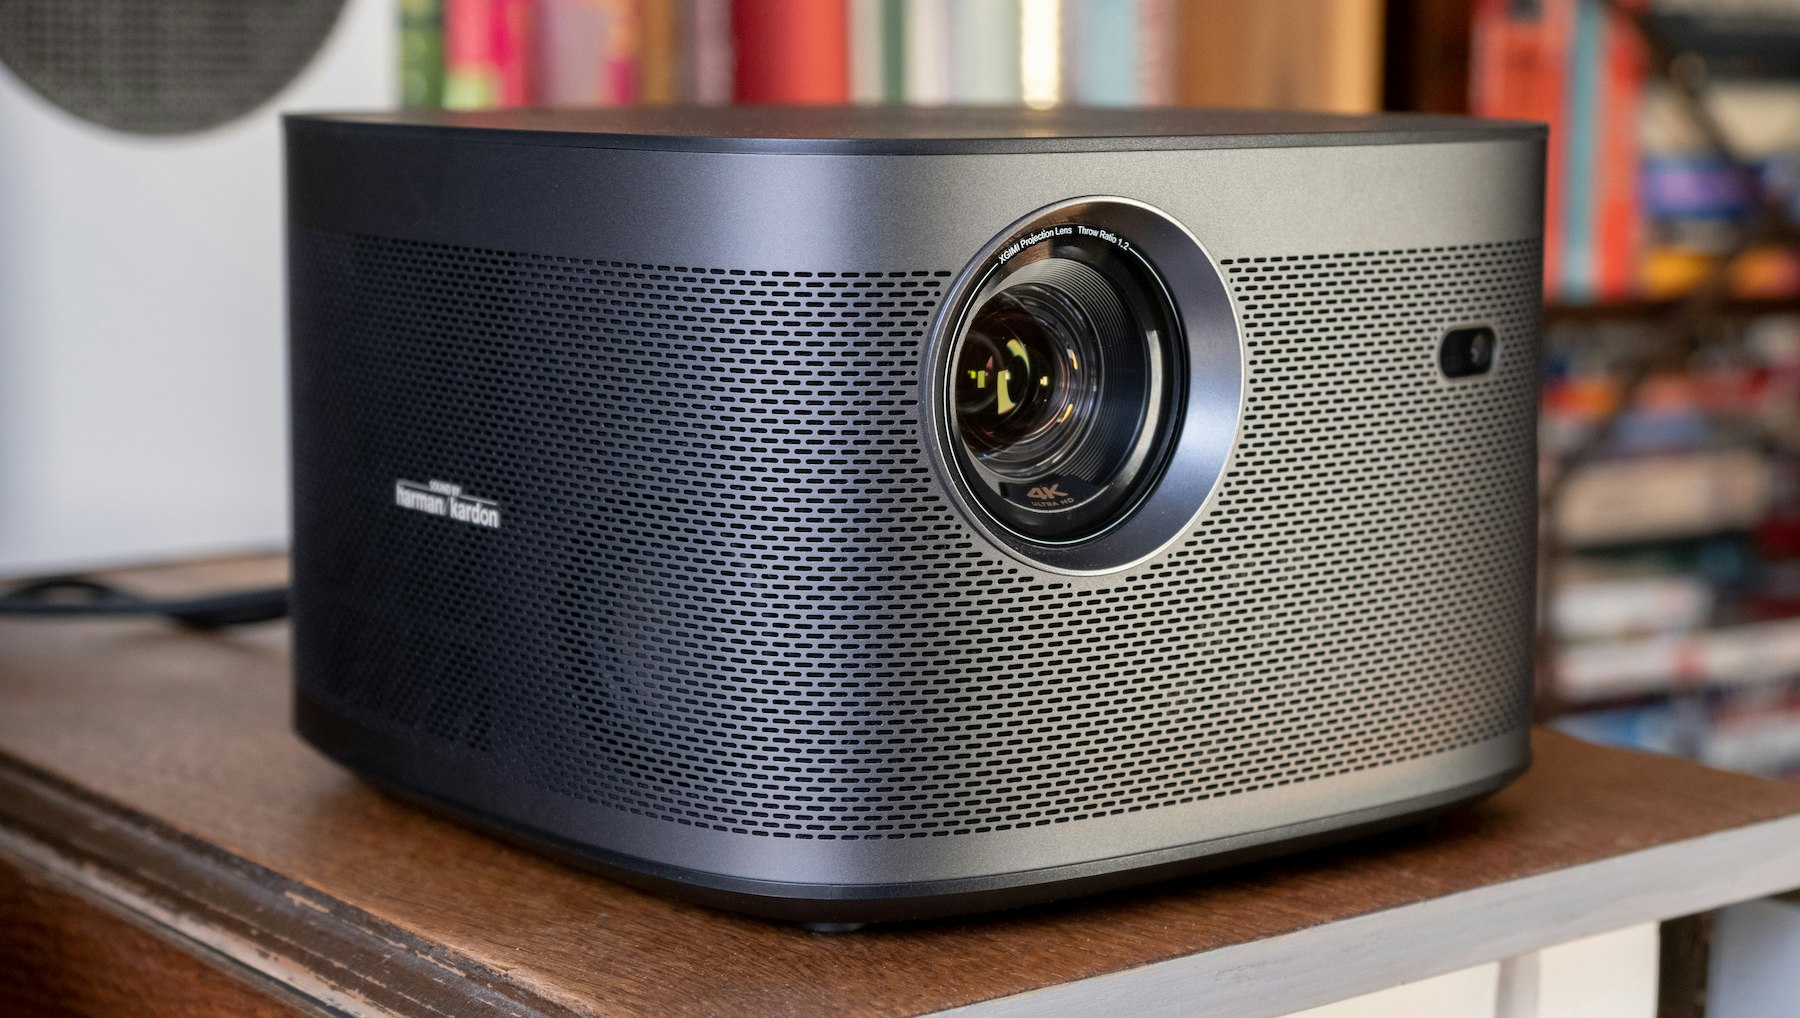 Xgimi Horizon Ultra review: a projector that brings something new